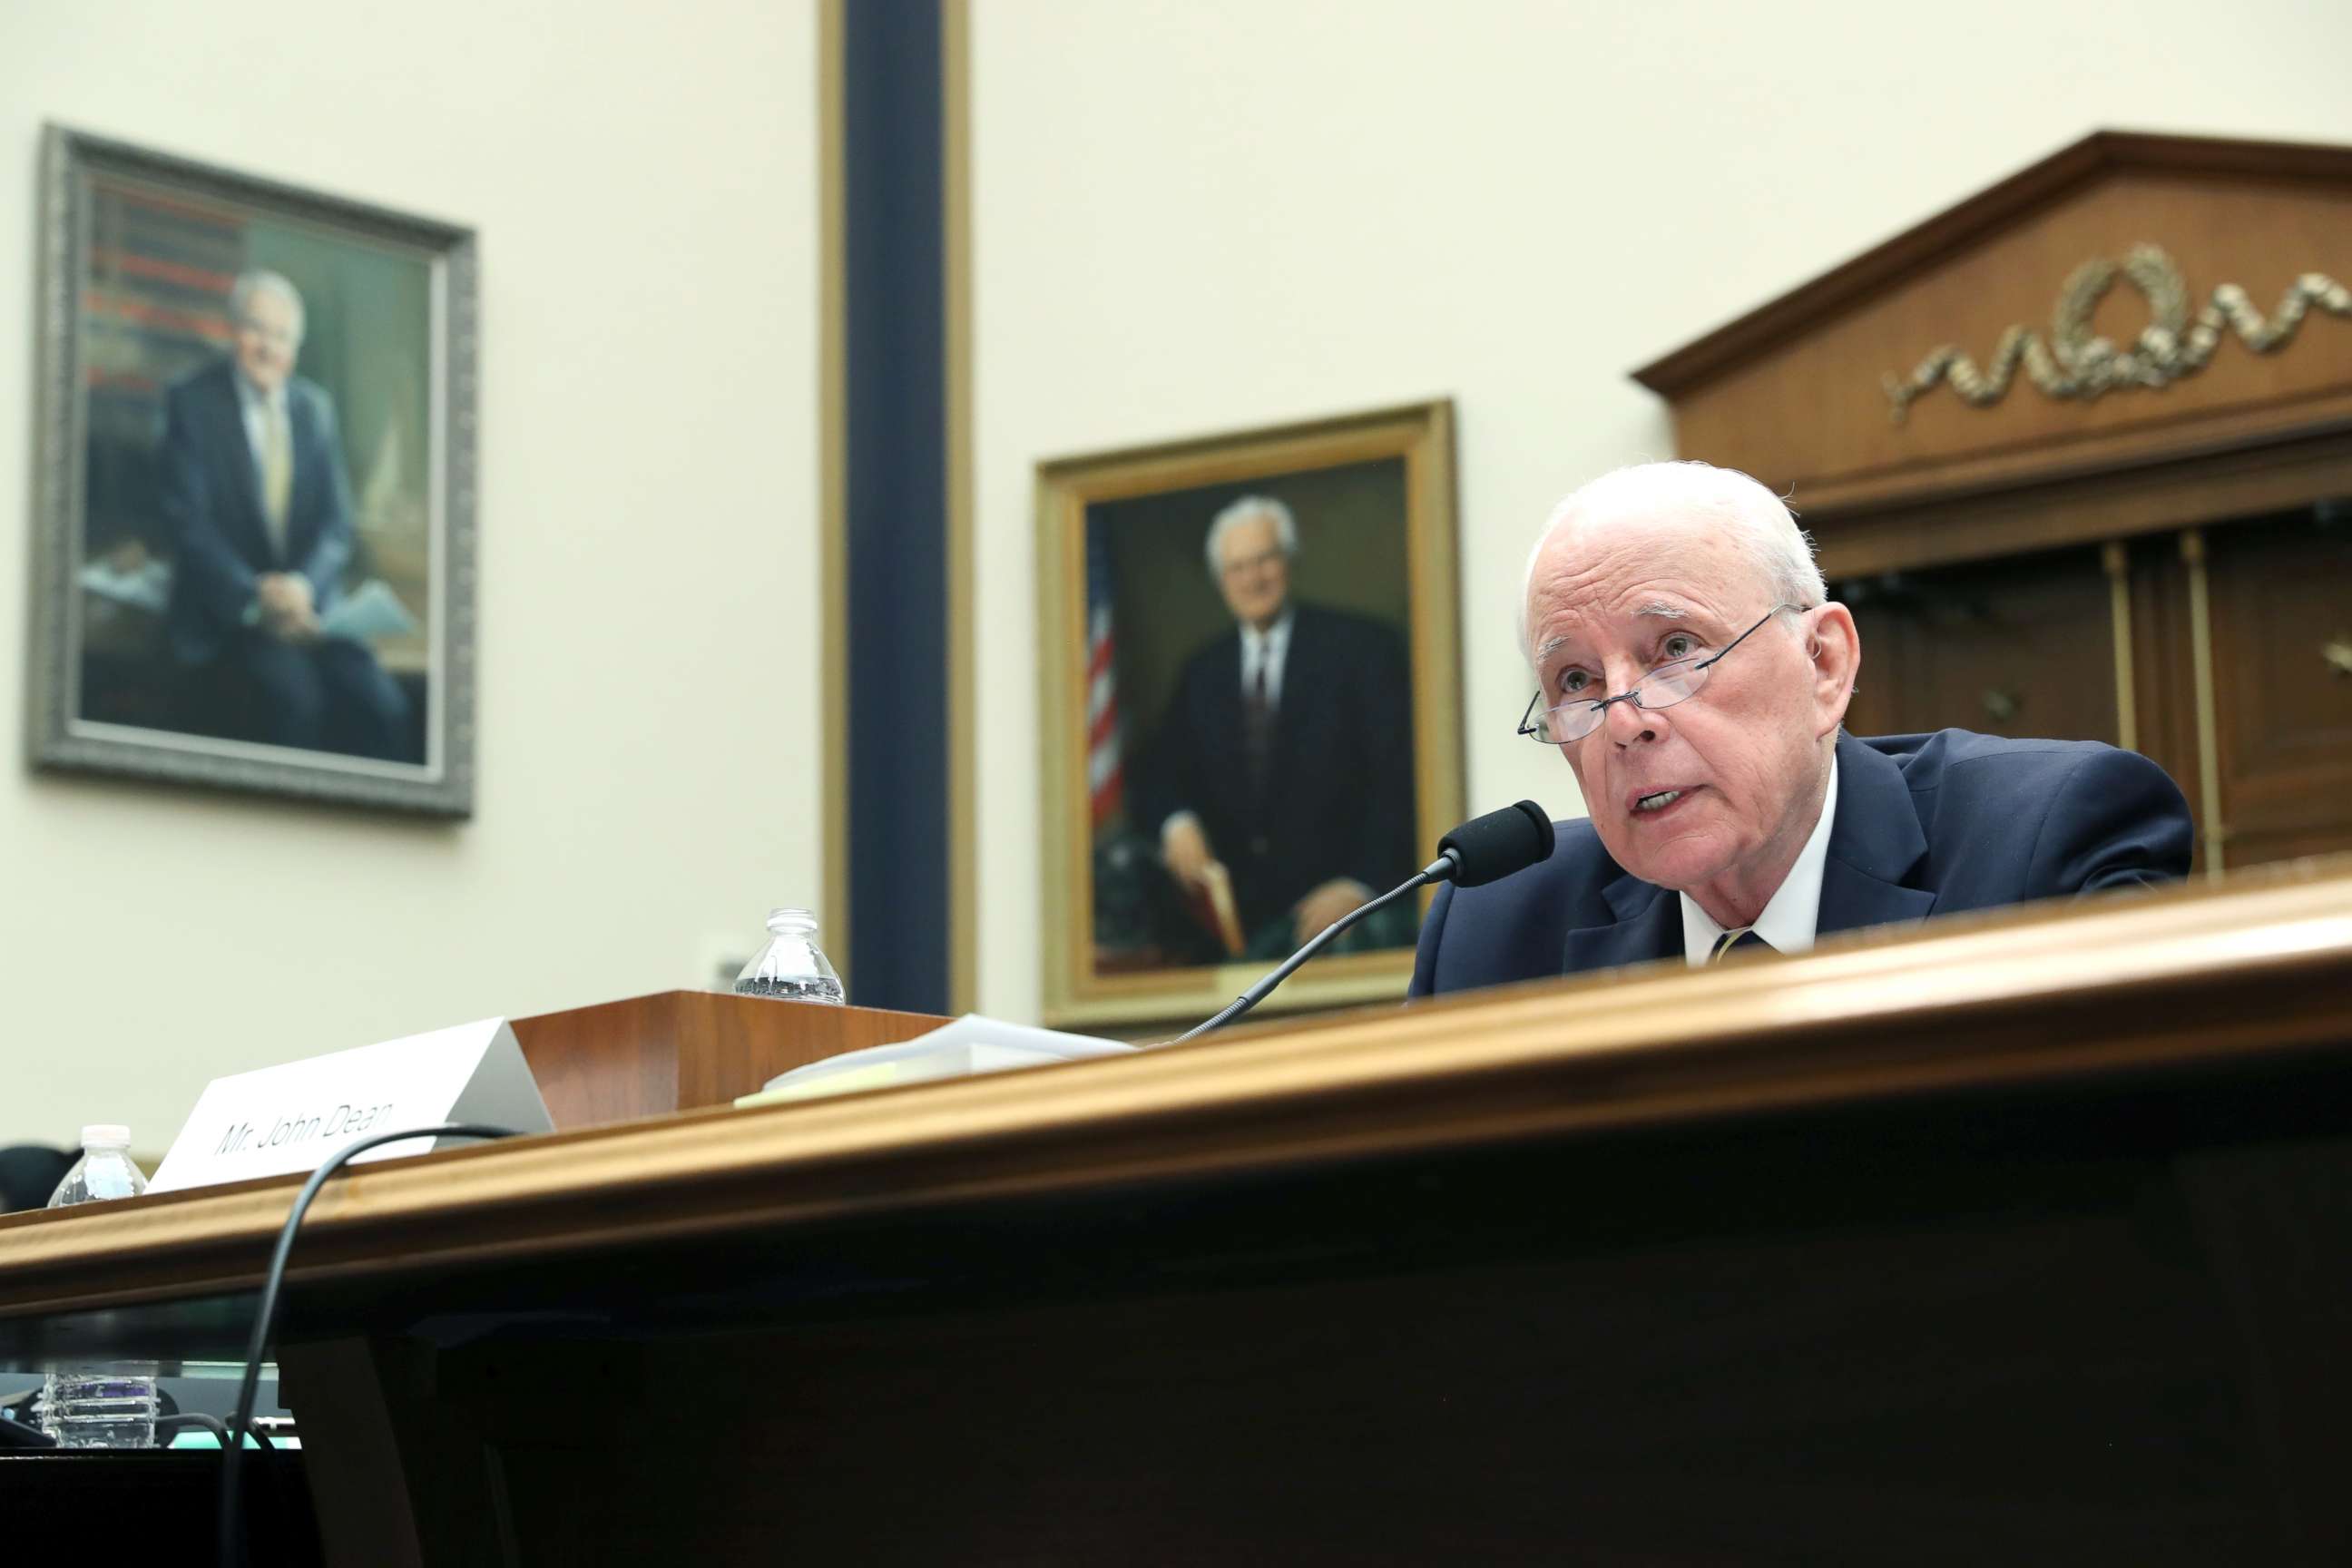 PHOTO: Former White House counsel John Dean testifies before a House Judiciary Committee hearing titled, "Lessons from the Mueller Report" on Capitol Hill, June 10, 2019.  